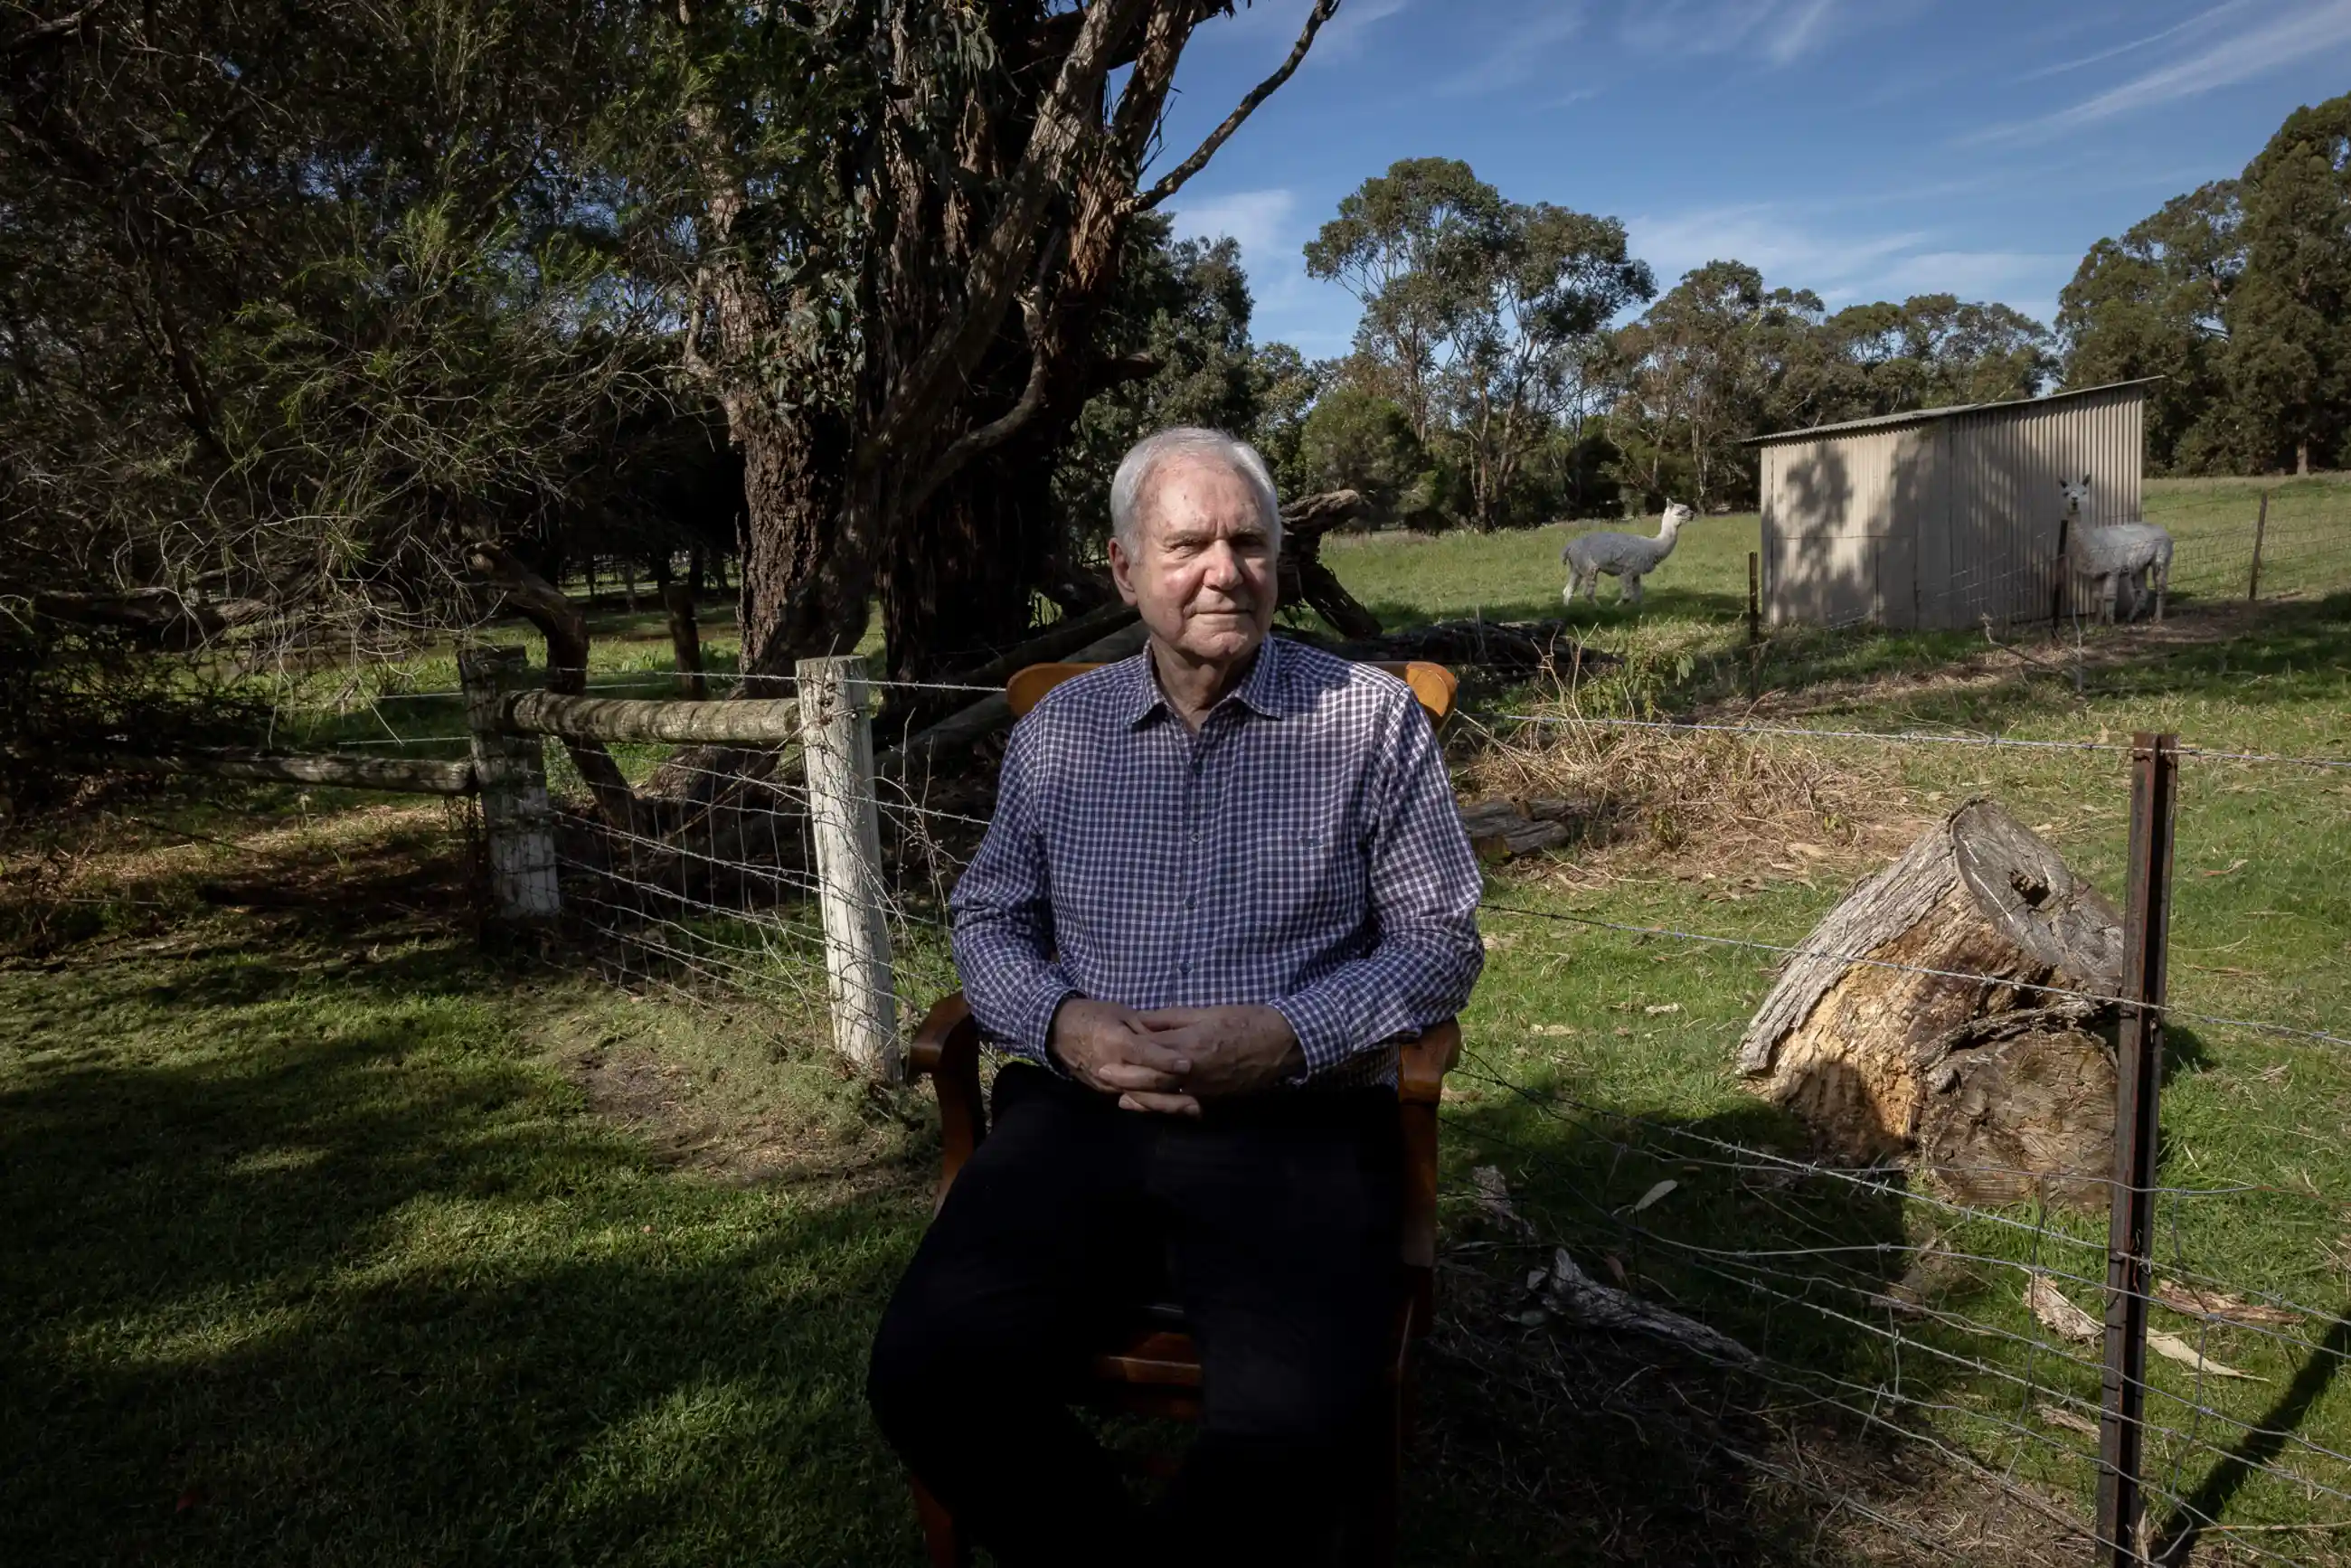 Climate scientist Dr. Graeme Pearman at his home in Bangholme, Victoria. On warning the world about abrupt climate change, he laments, “I often wonder: where did I go wrong? Why didn’t people respond? Is that my responsibility?” Photo: Nadir Kinani / The Guardian